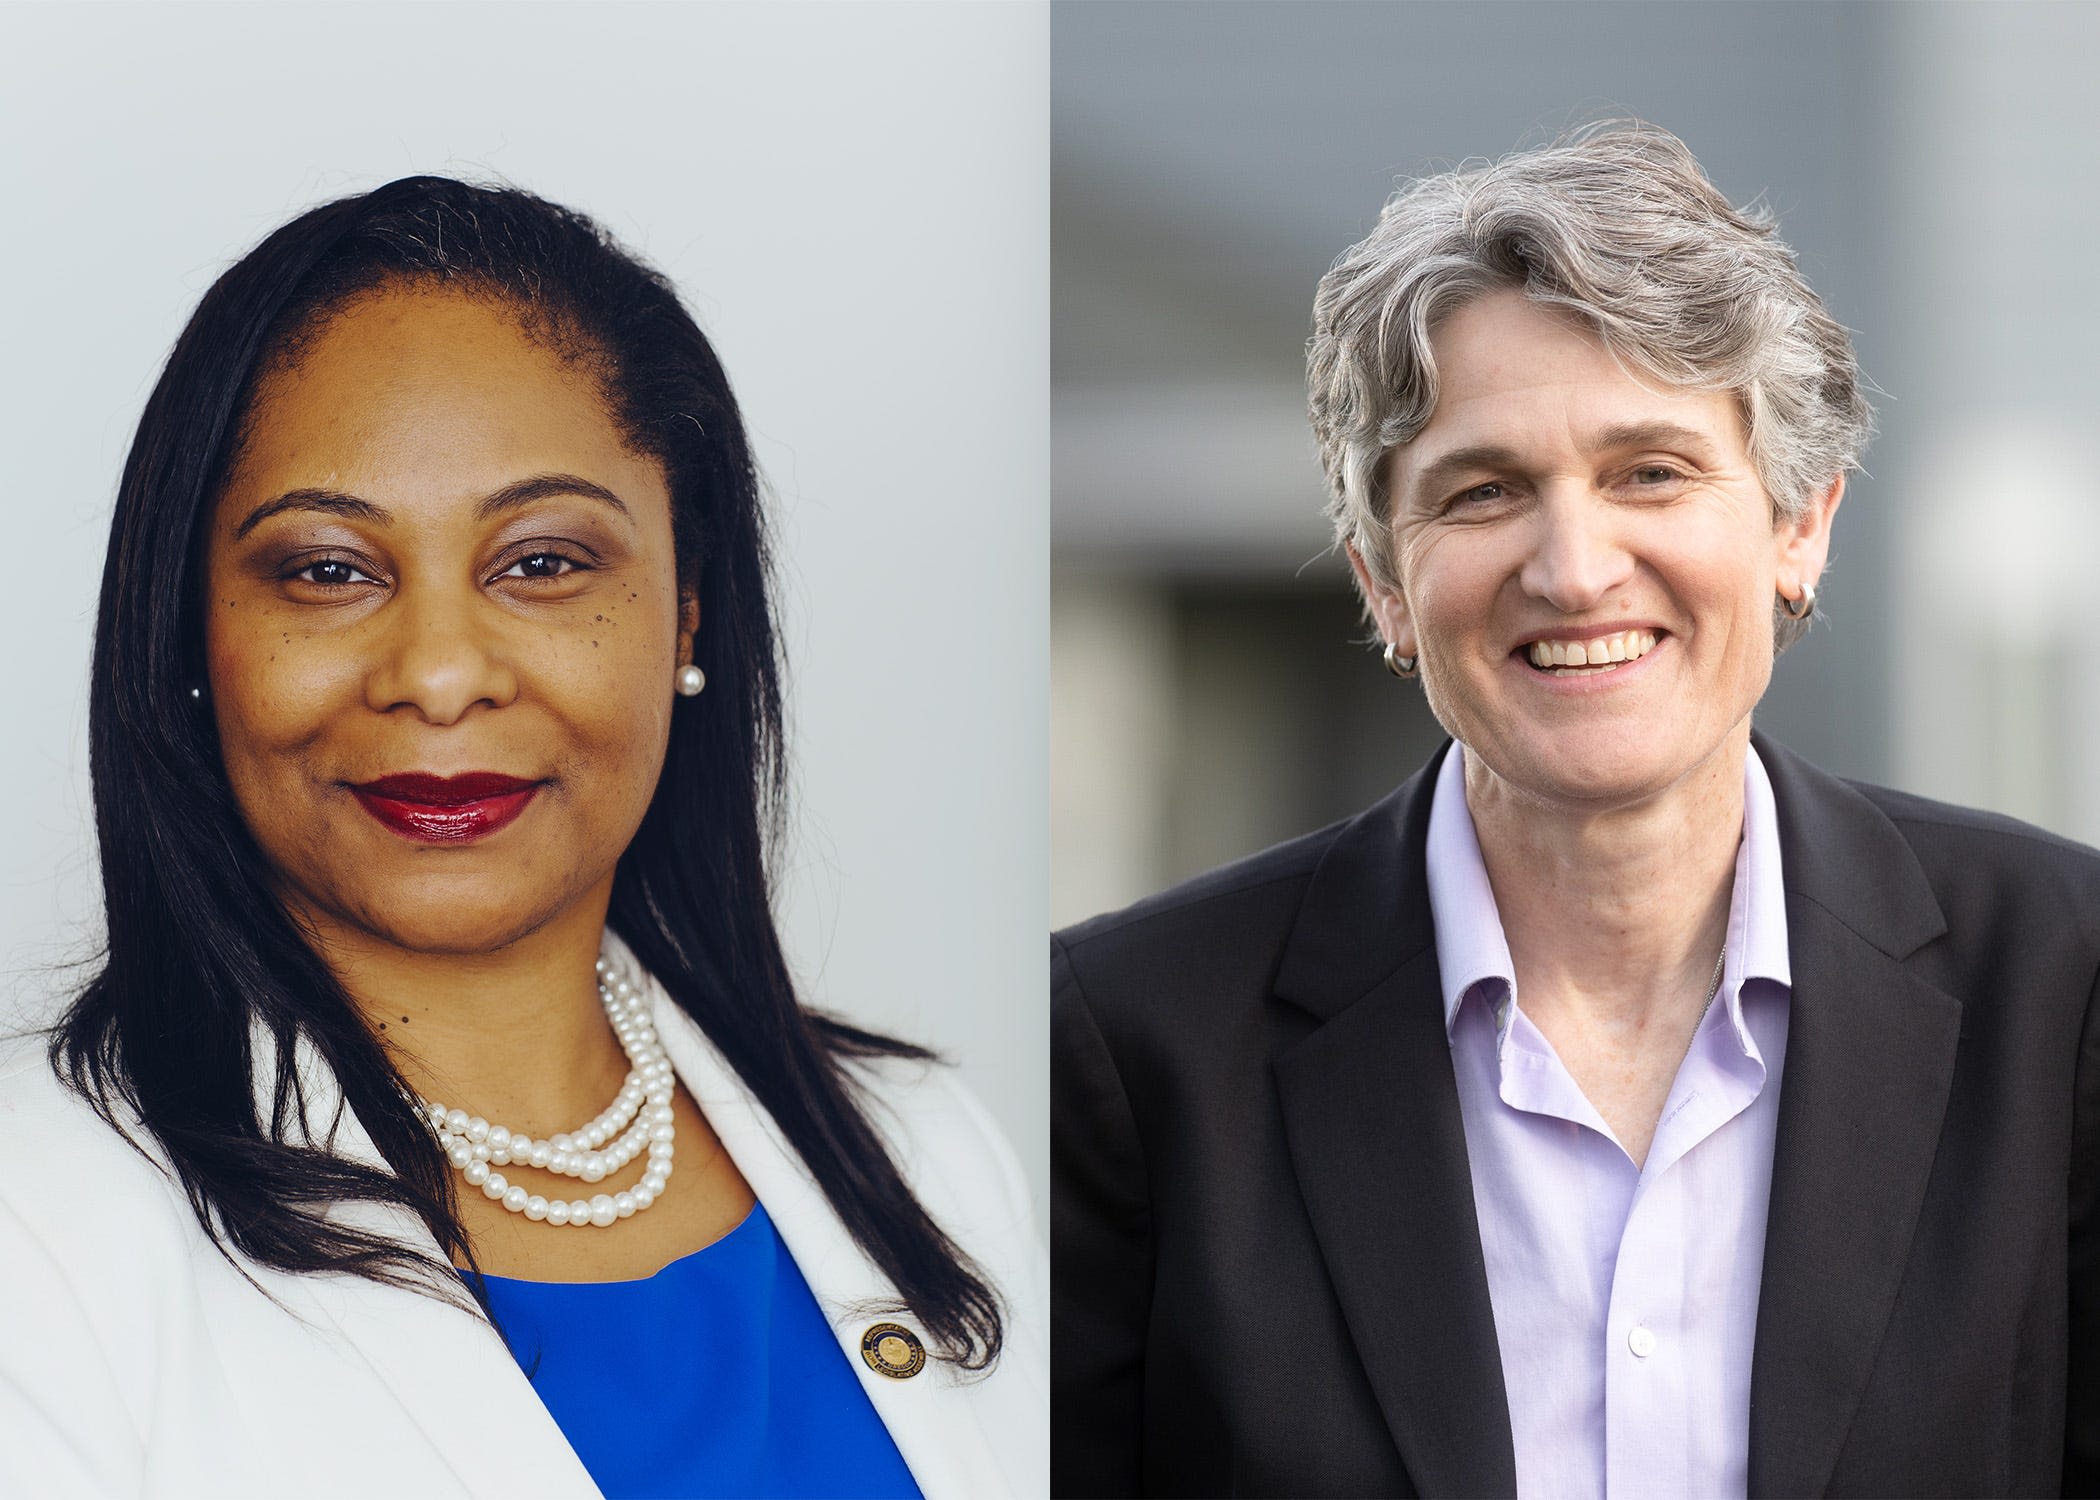 Janelle Bynum and Jamie McLeod-Skinner compete for Democratic nomination in 5th District